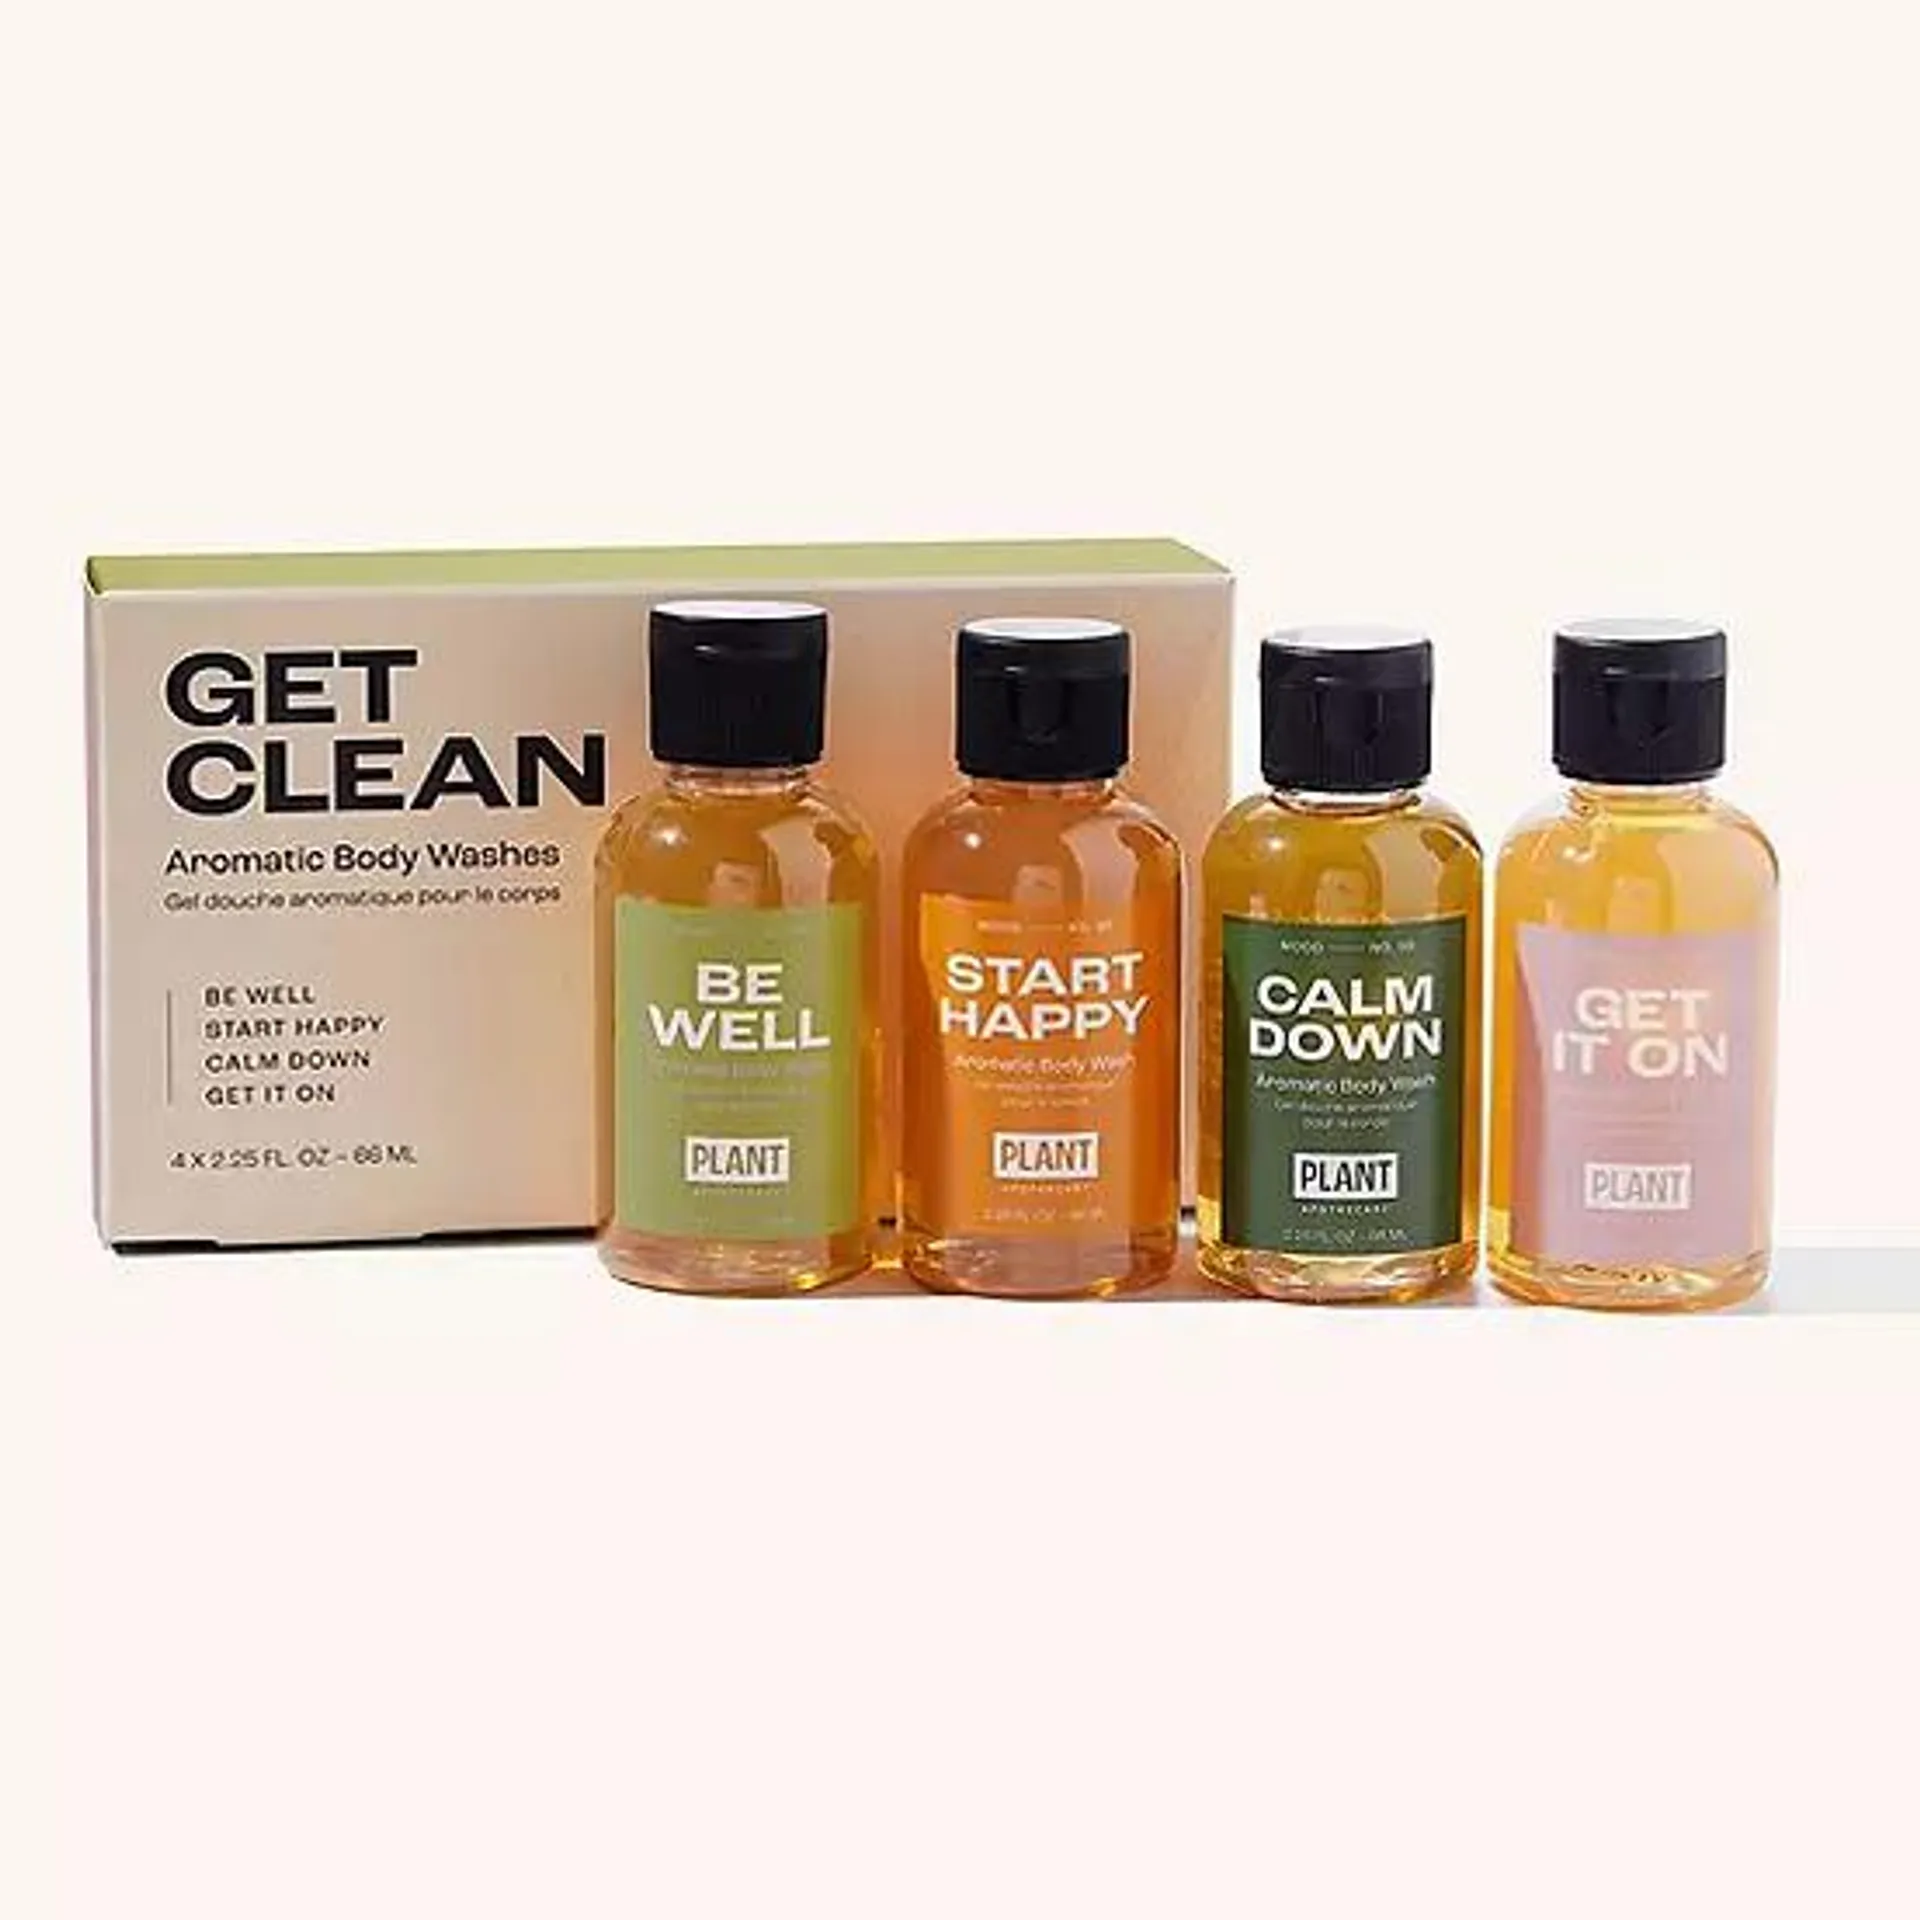 Plant Apothecary Get Clean Aromatic Body Wash Kit